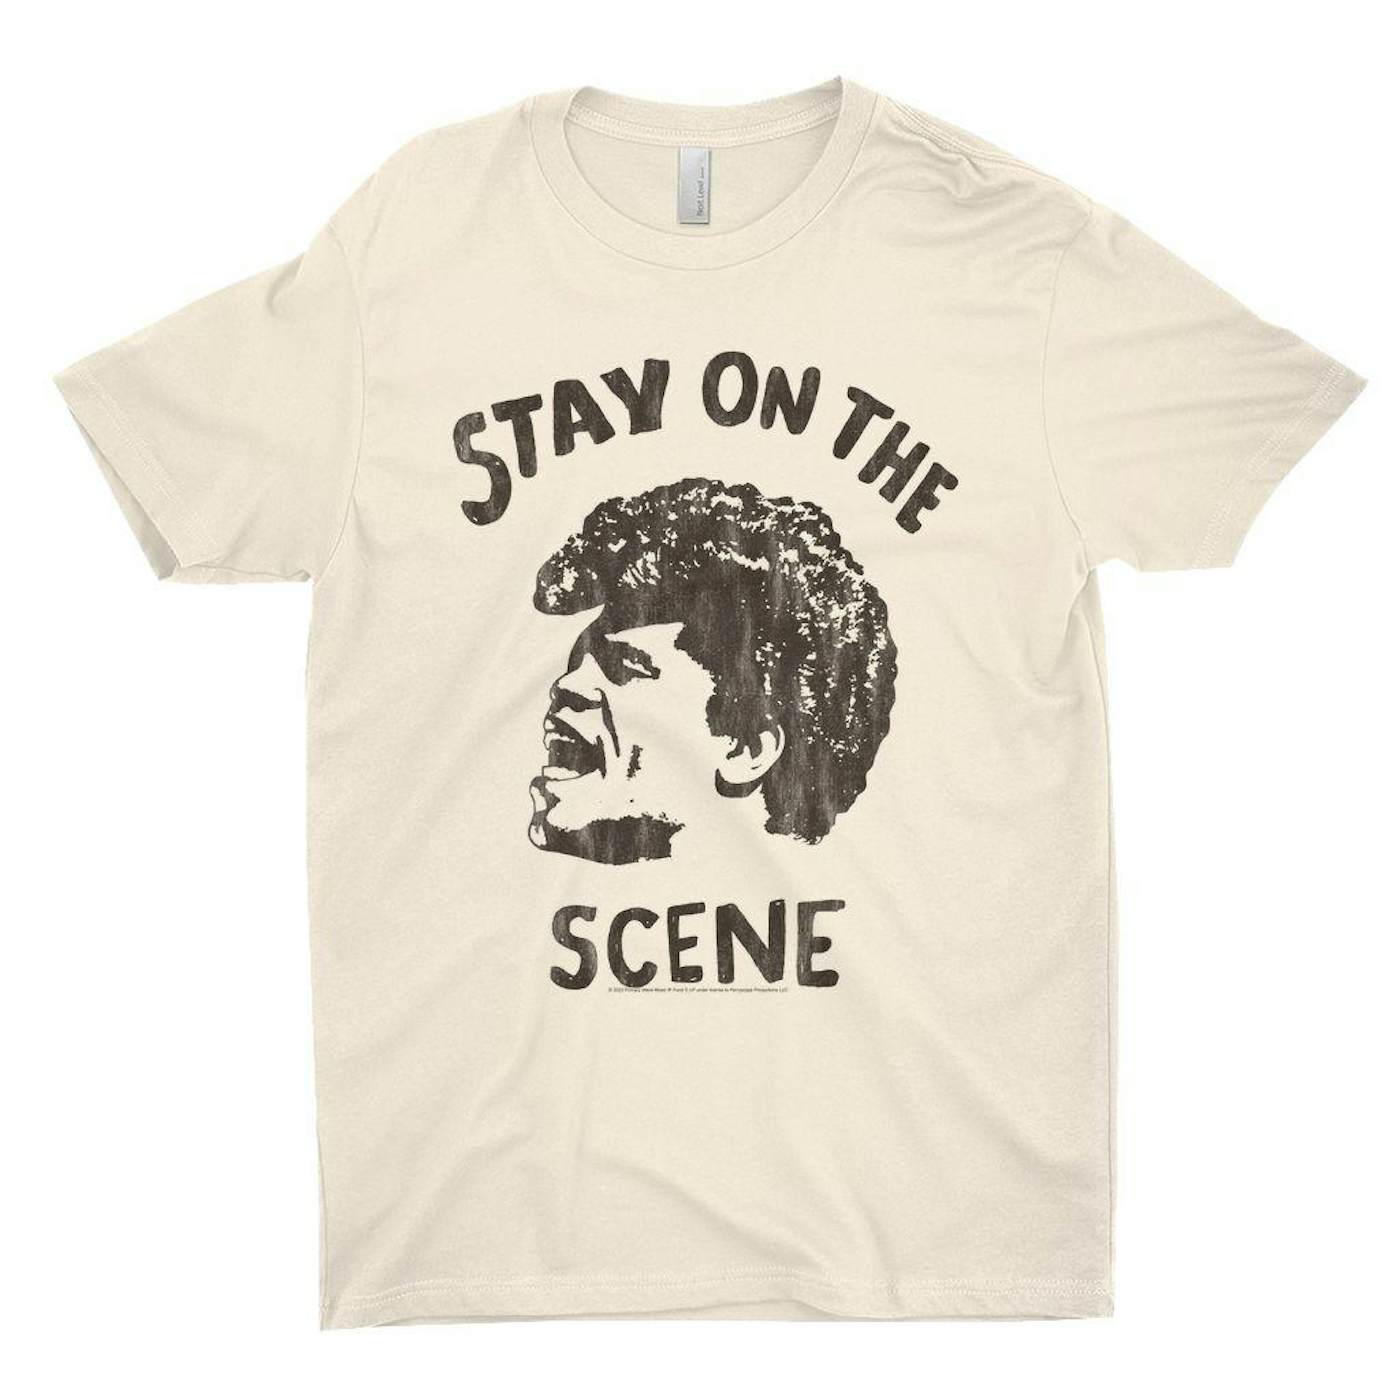 James Brown T-Shirt | Stay On The Scene Sketch James Brown Shirt